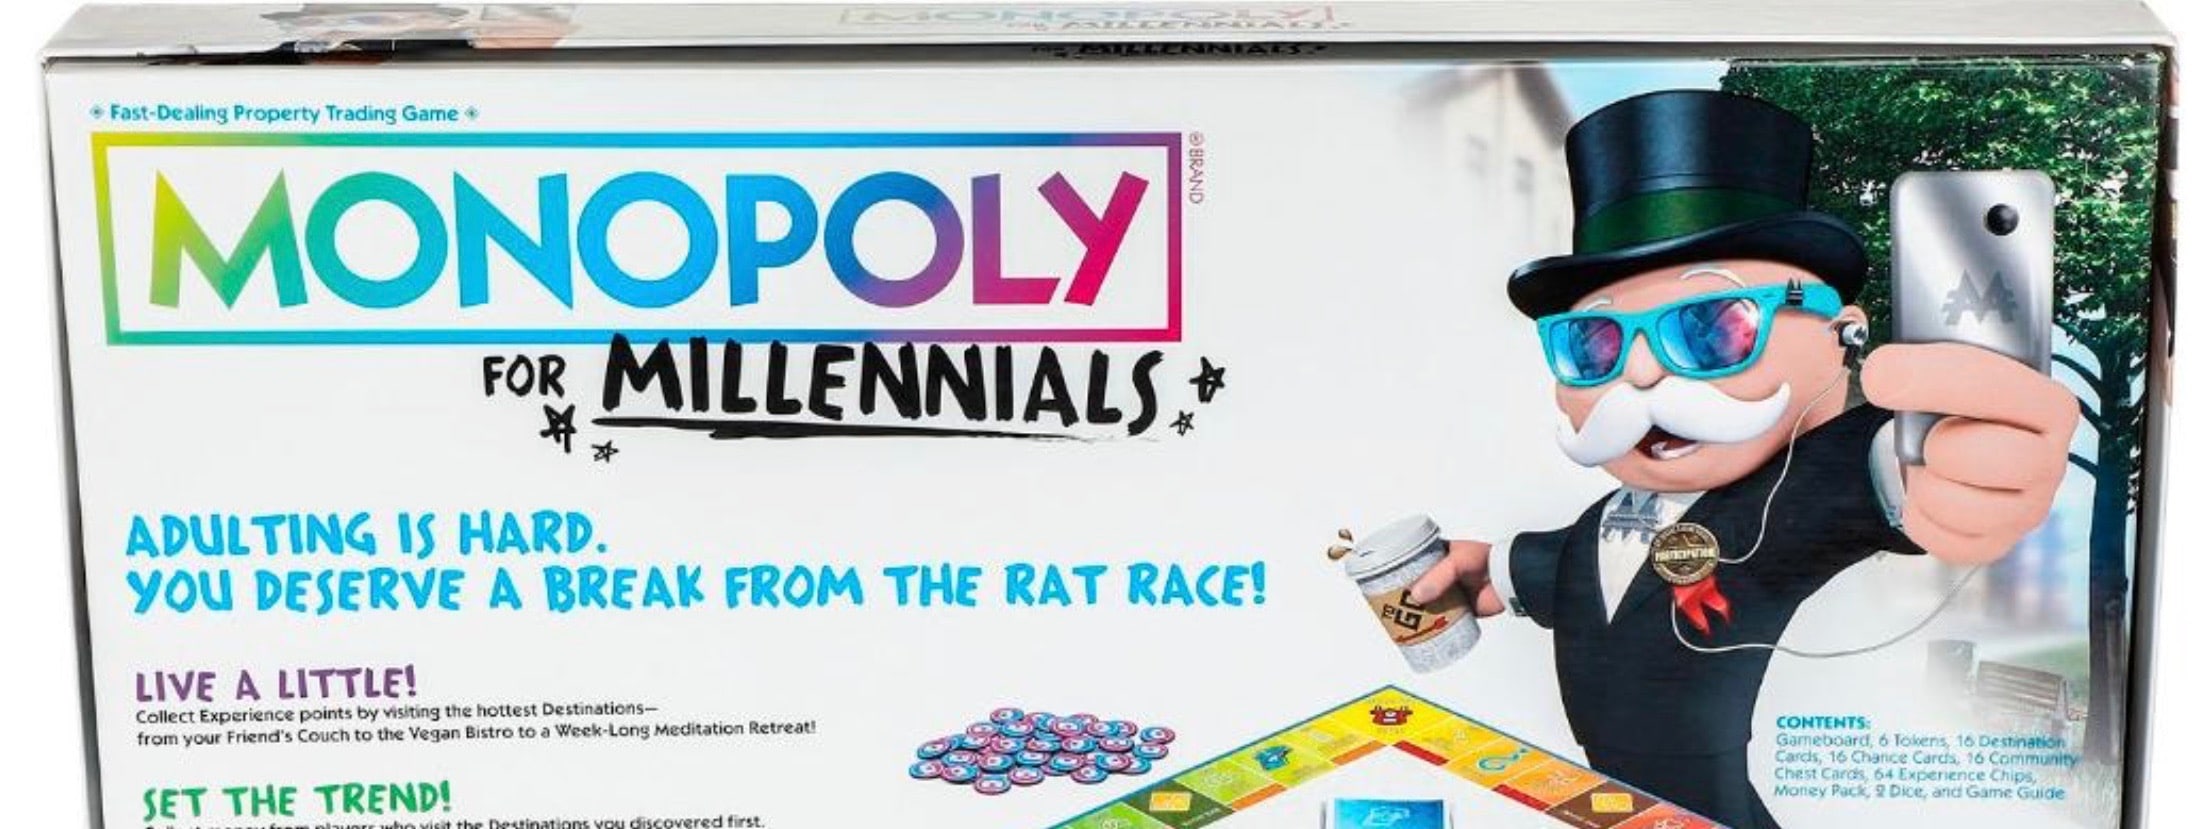 where to buy monopoly for millennials